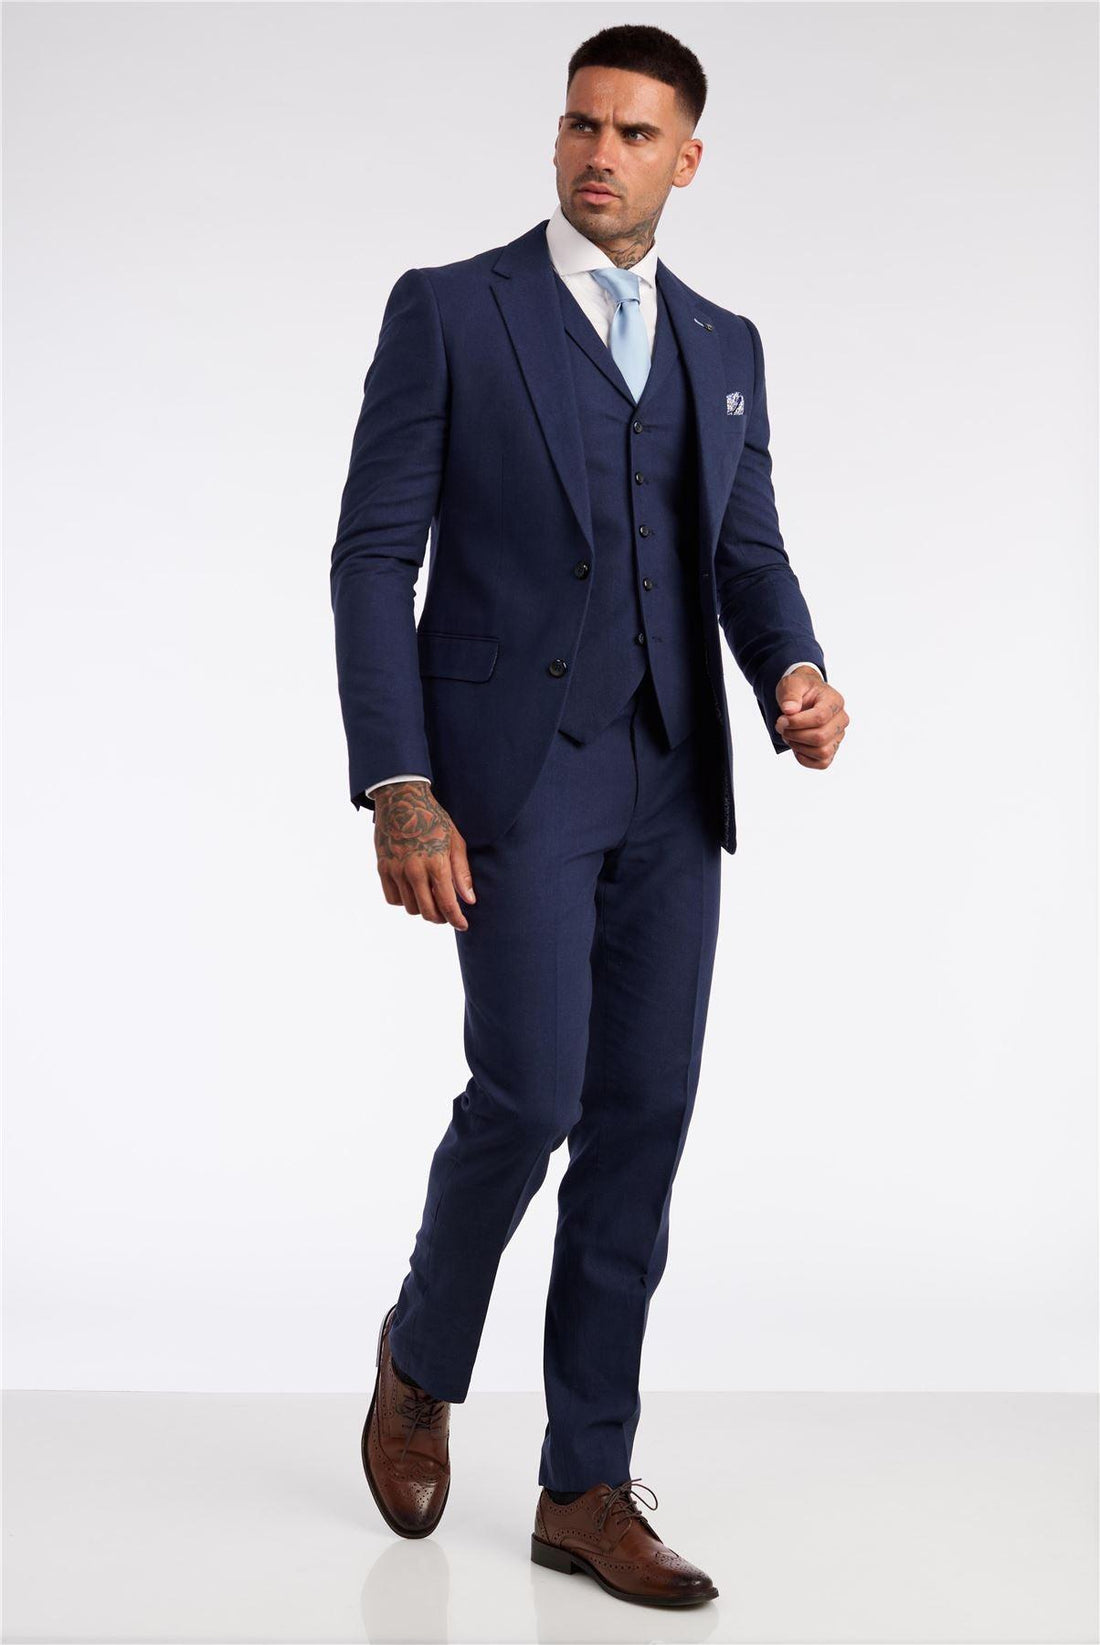 Mens 3 Piece Linen Suit Summer Breathable Wedding Cotton Navy Blue - Knighthood Store